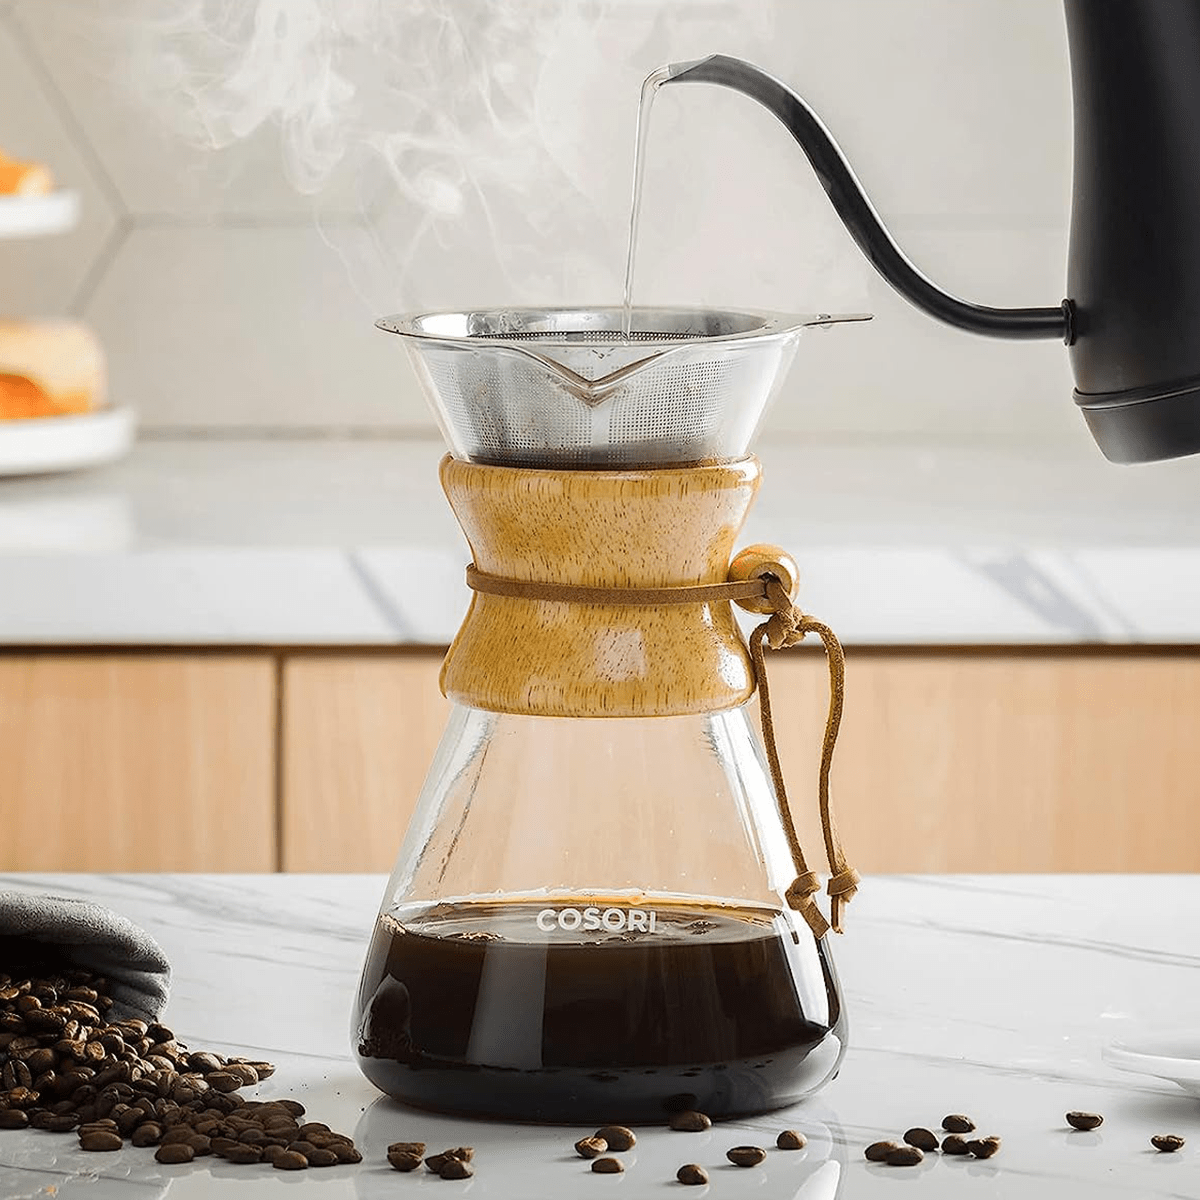 The Best RV Coffee Maker Might Be Not Having One